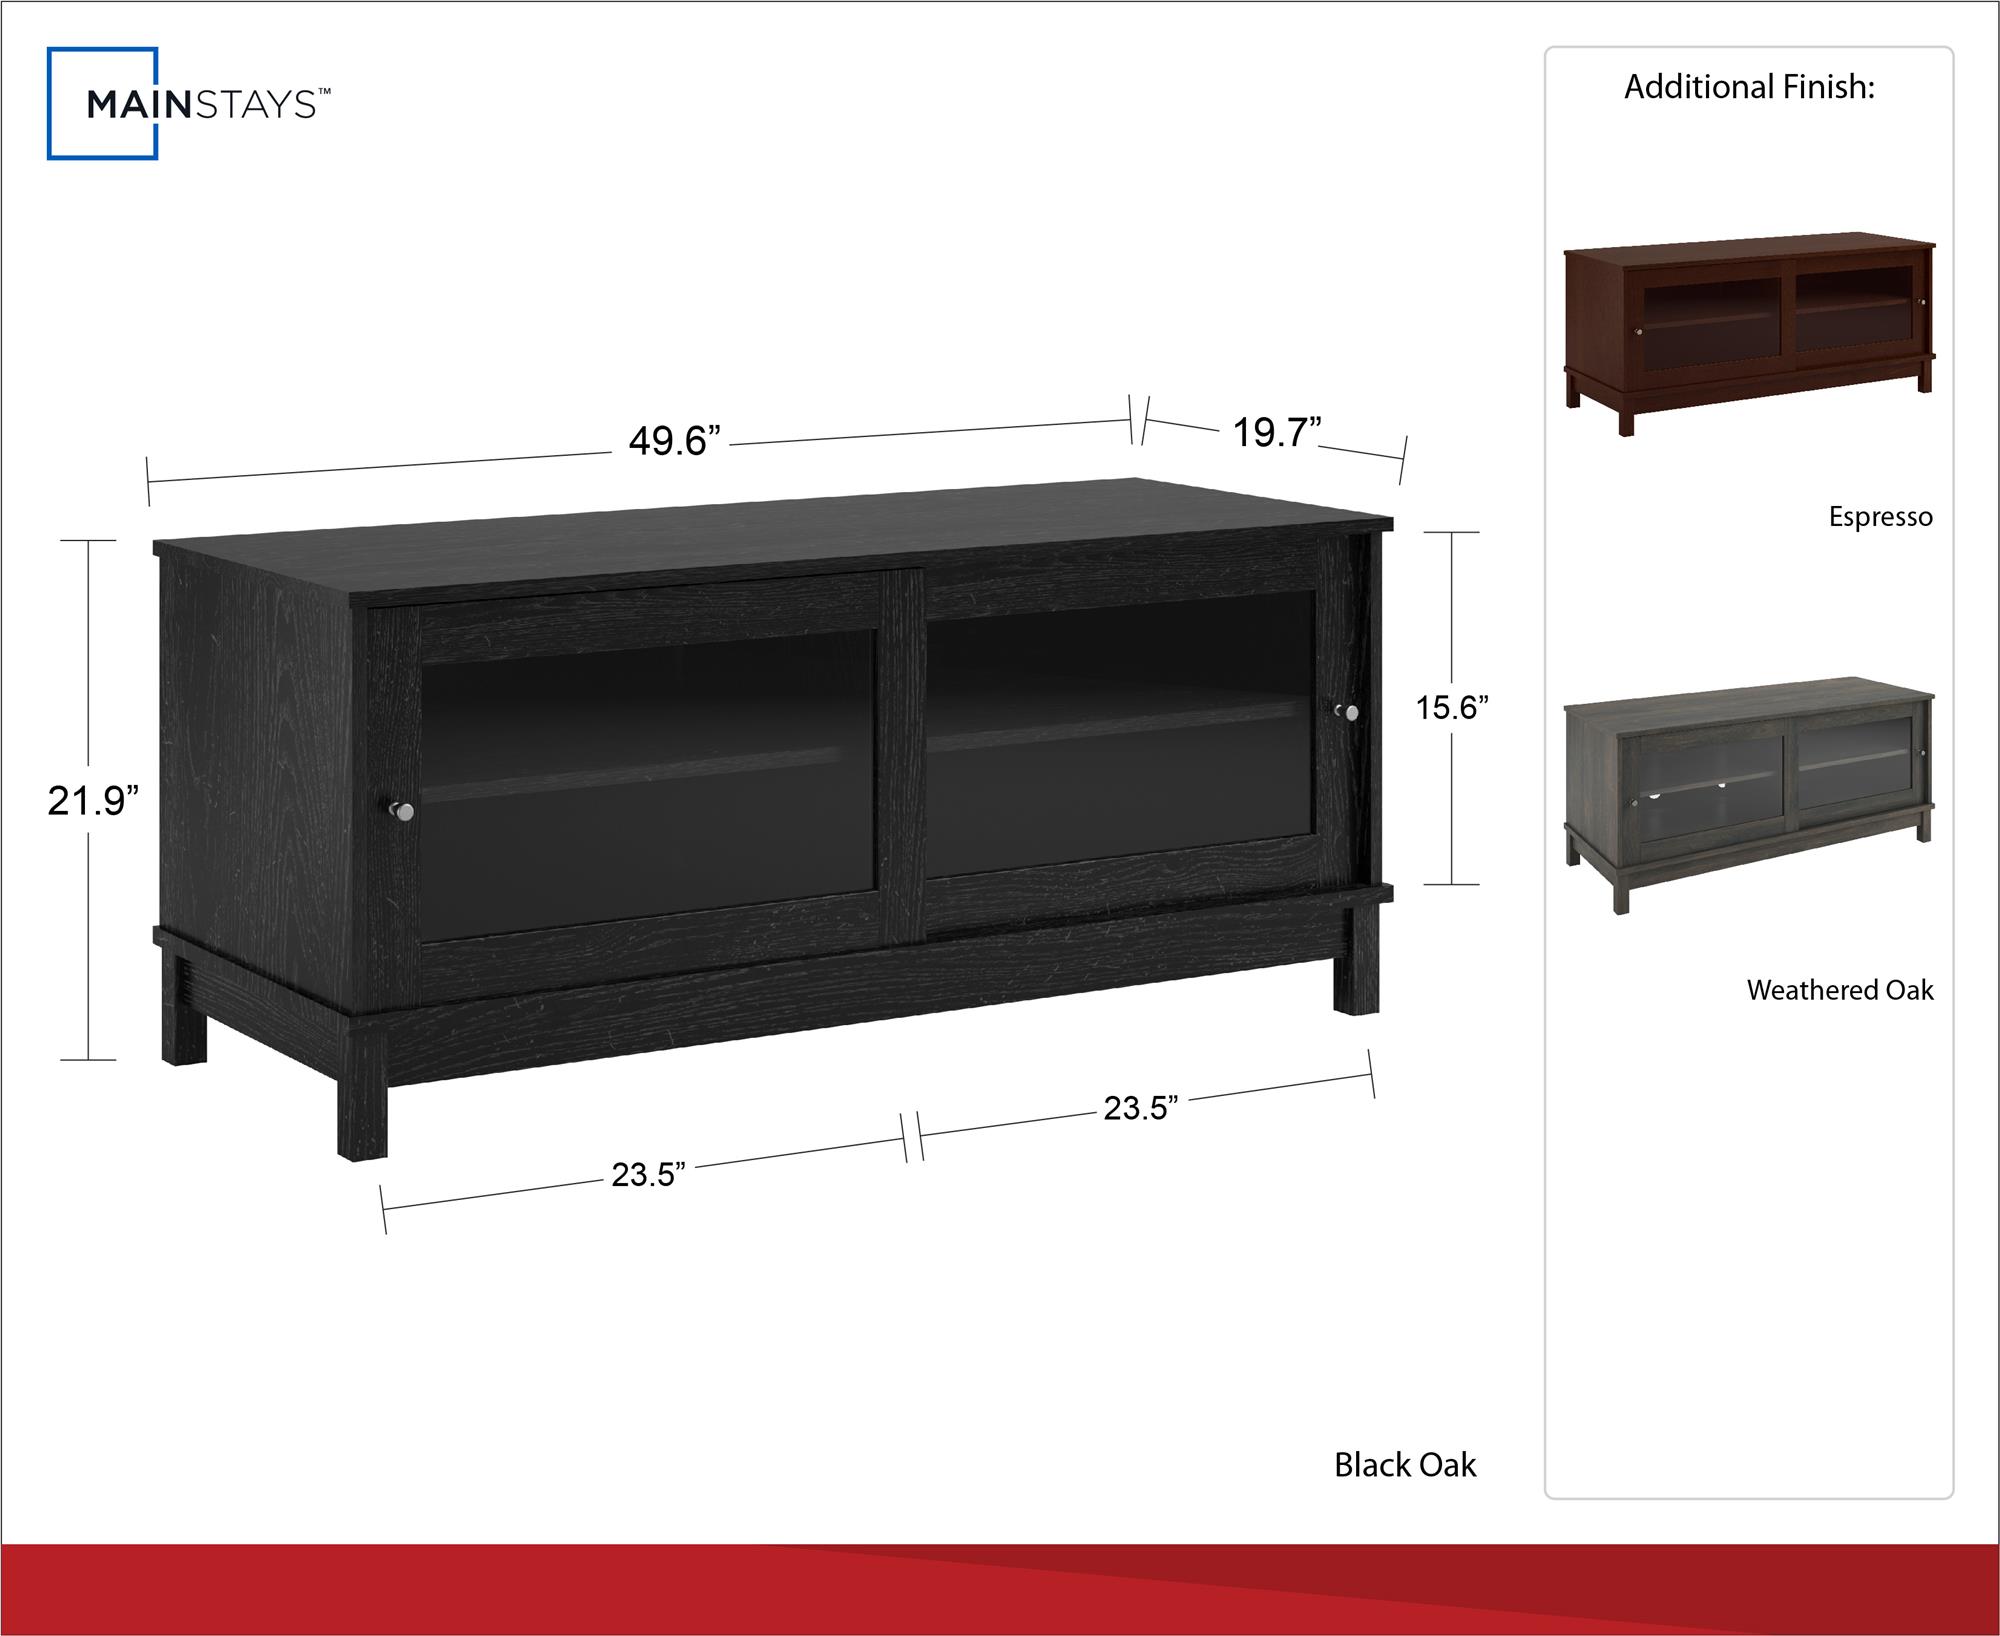 Mainstays TV Stand for TVs up to 55", Multiple Finishes - Black - image 5 of 9